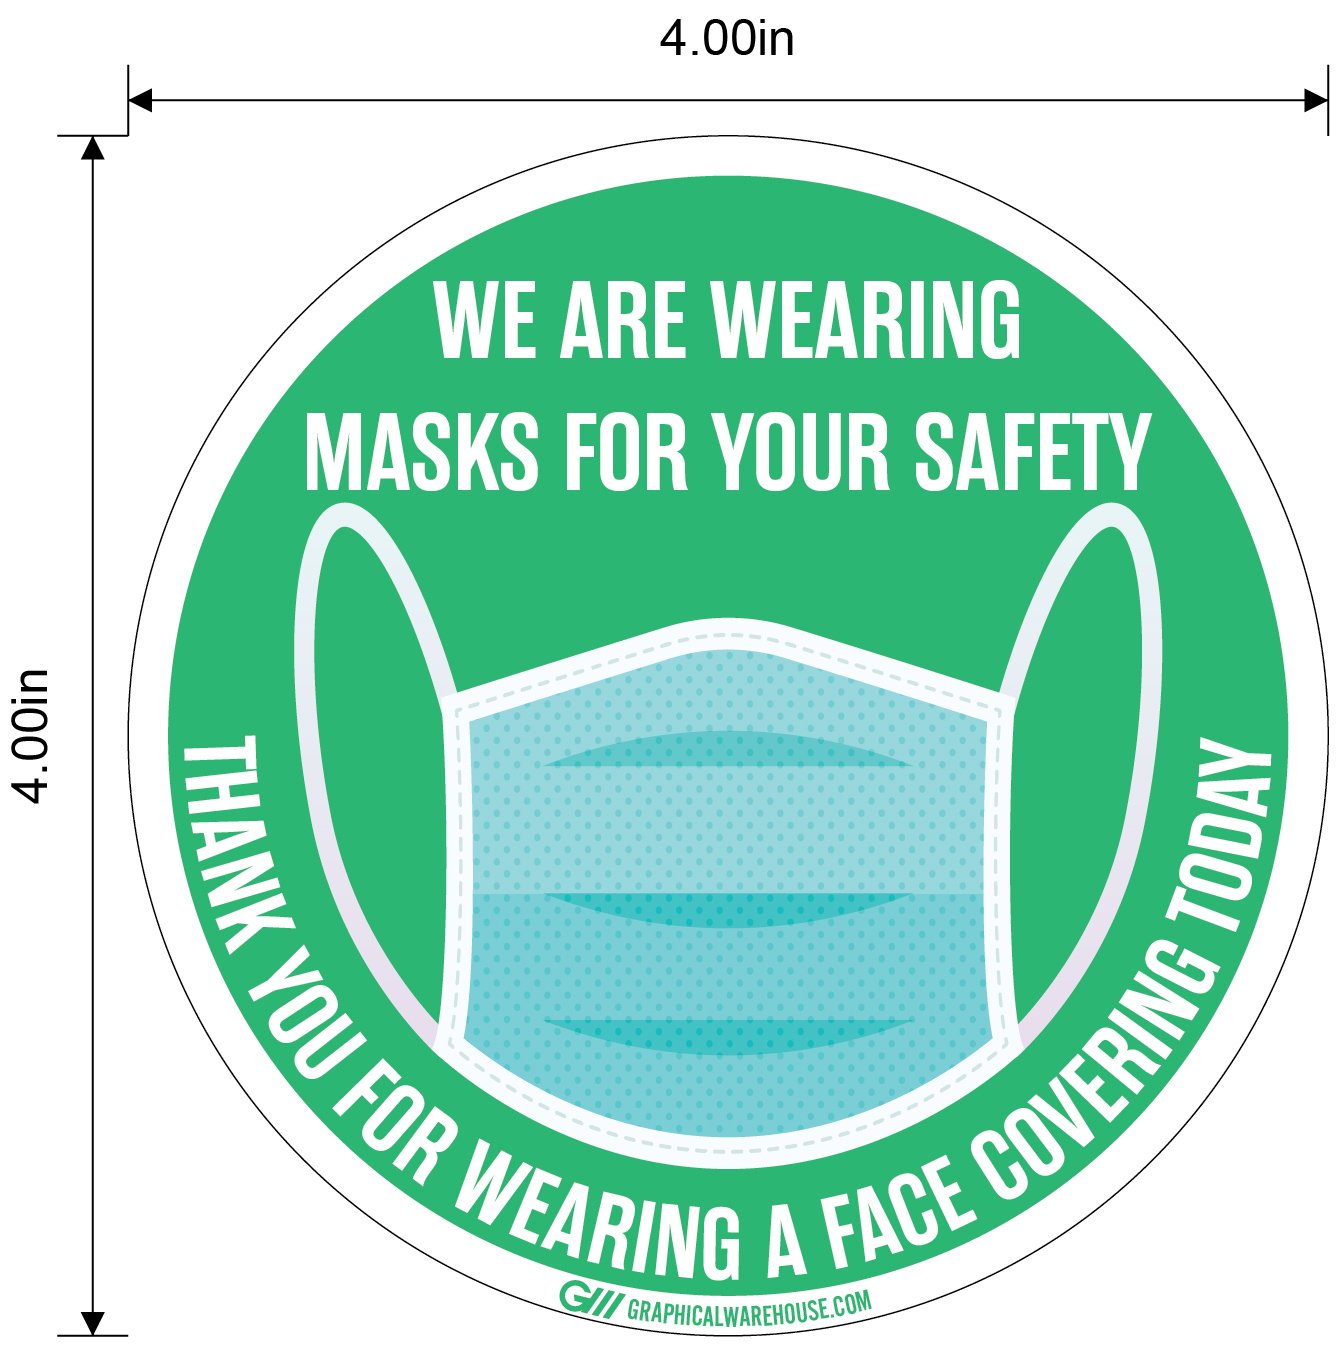 "We Are Wearing Masks For Your Safety" Pack of 10, Adhesive Durable Vinyl Decal- Various Sizes/Colors Available